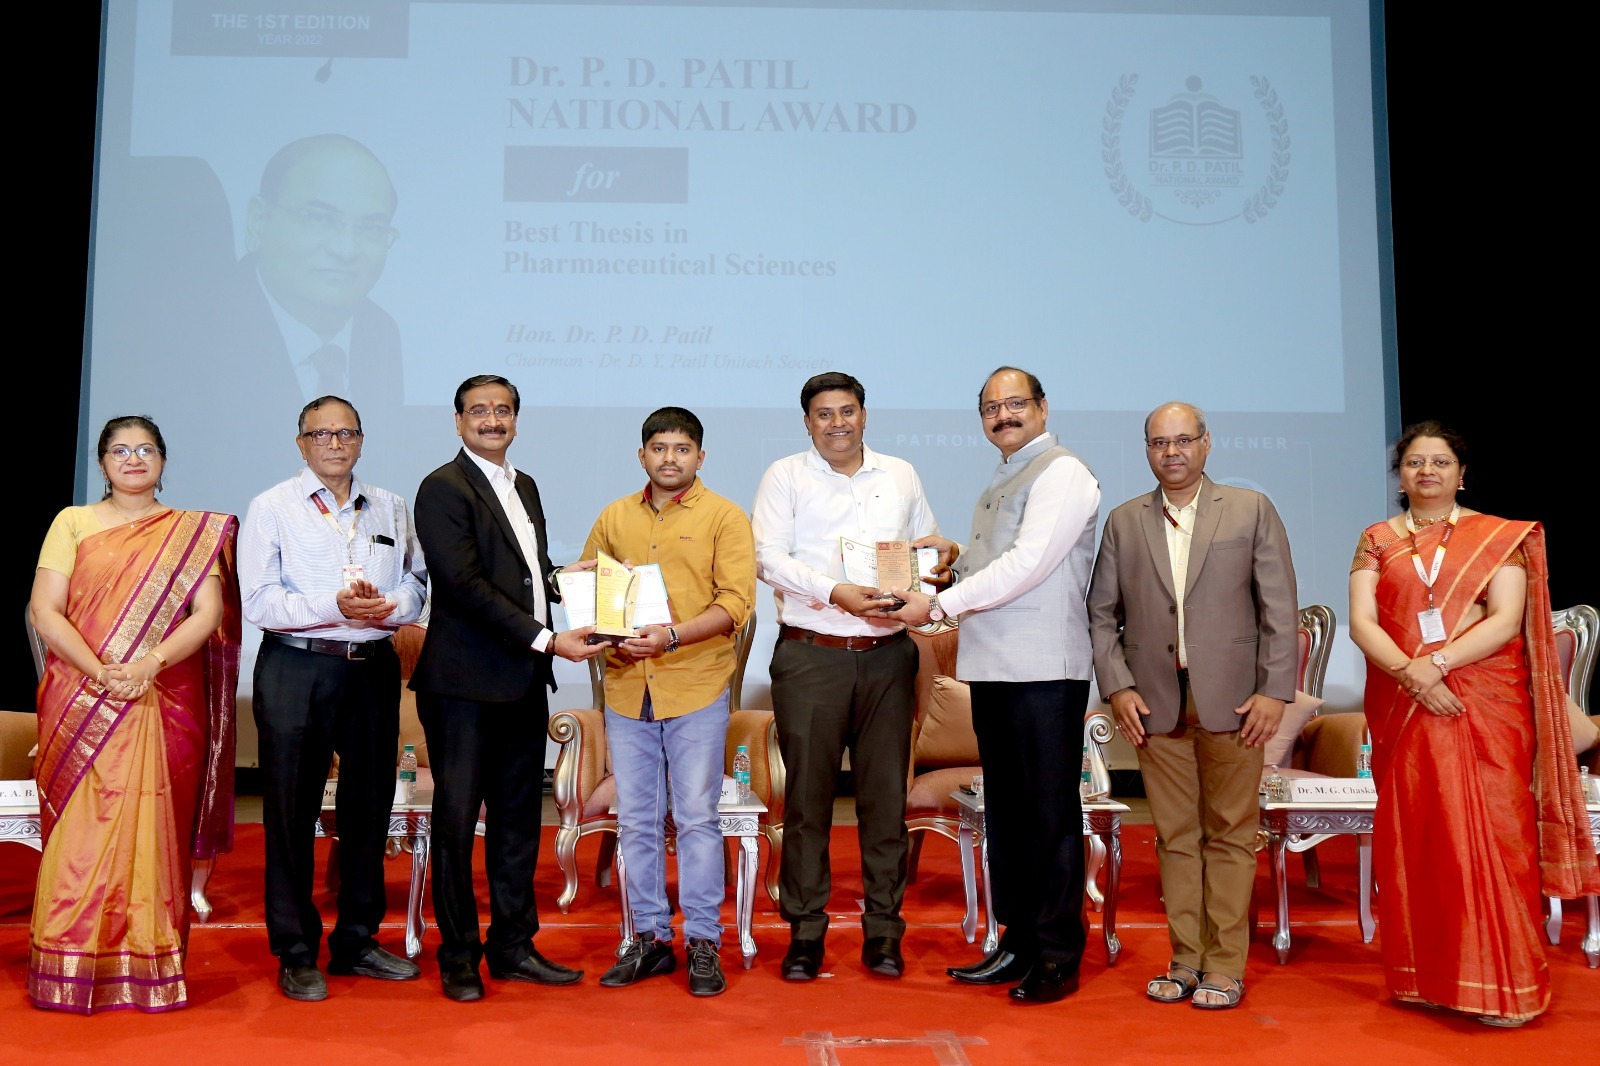 H. R. Patel Institute of Pharm. Education & Research Students and Mentor Clinch Prestigious Dr. P. D. Patil National Dissertation Award 